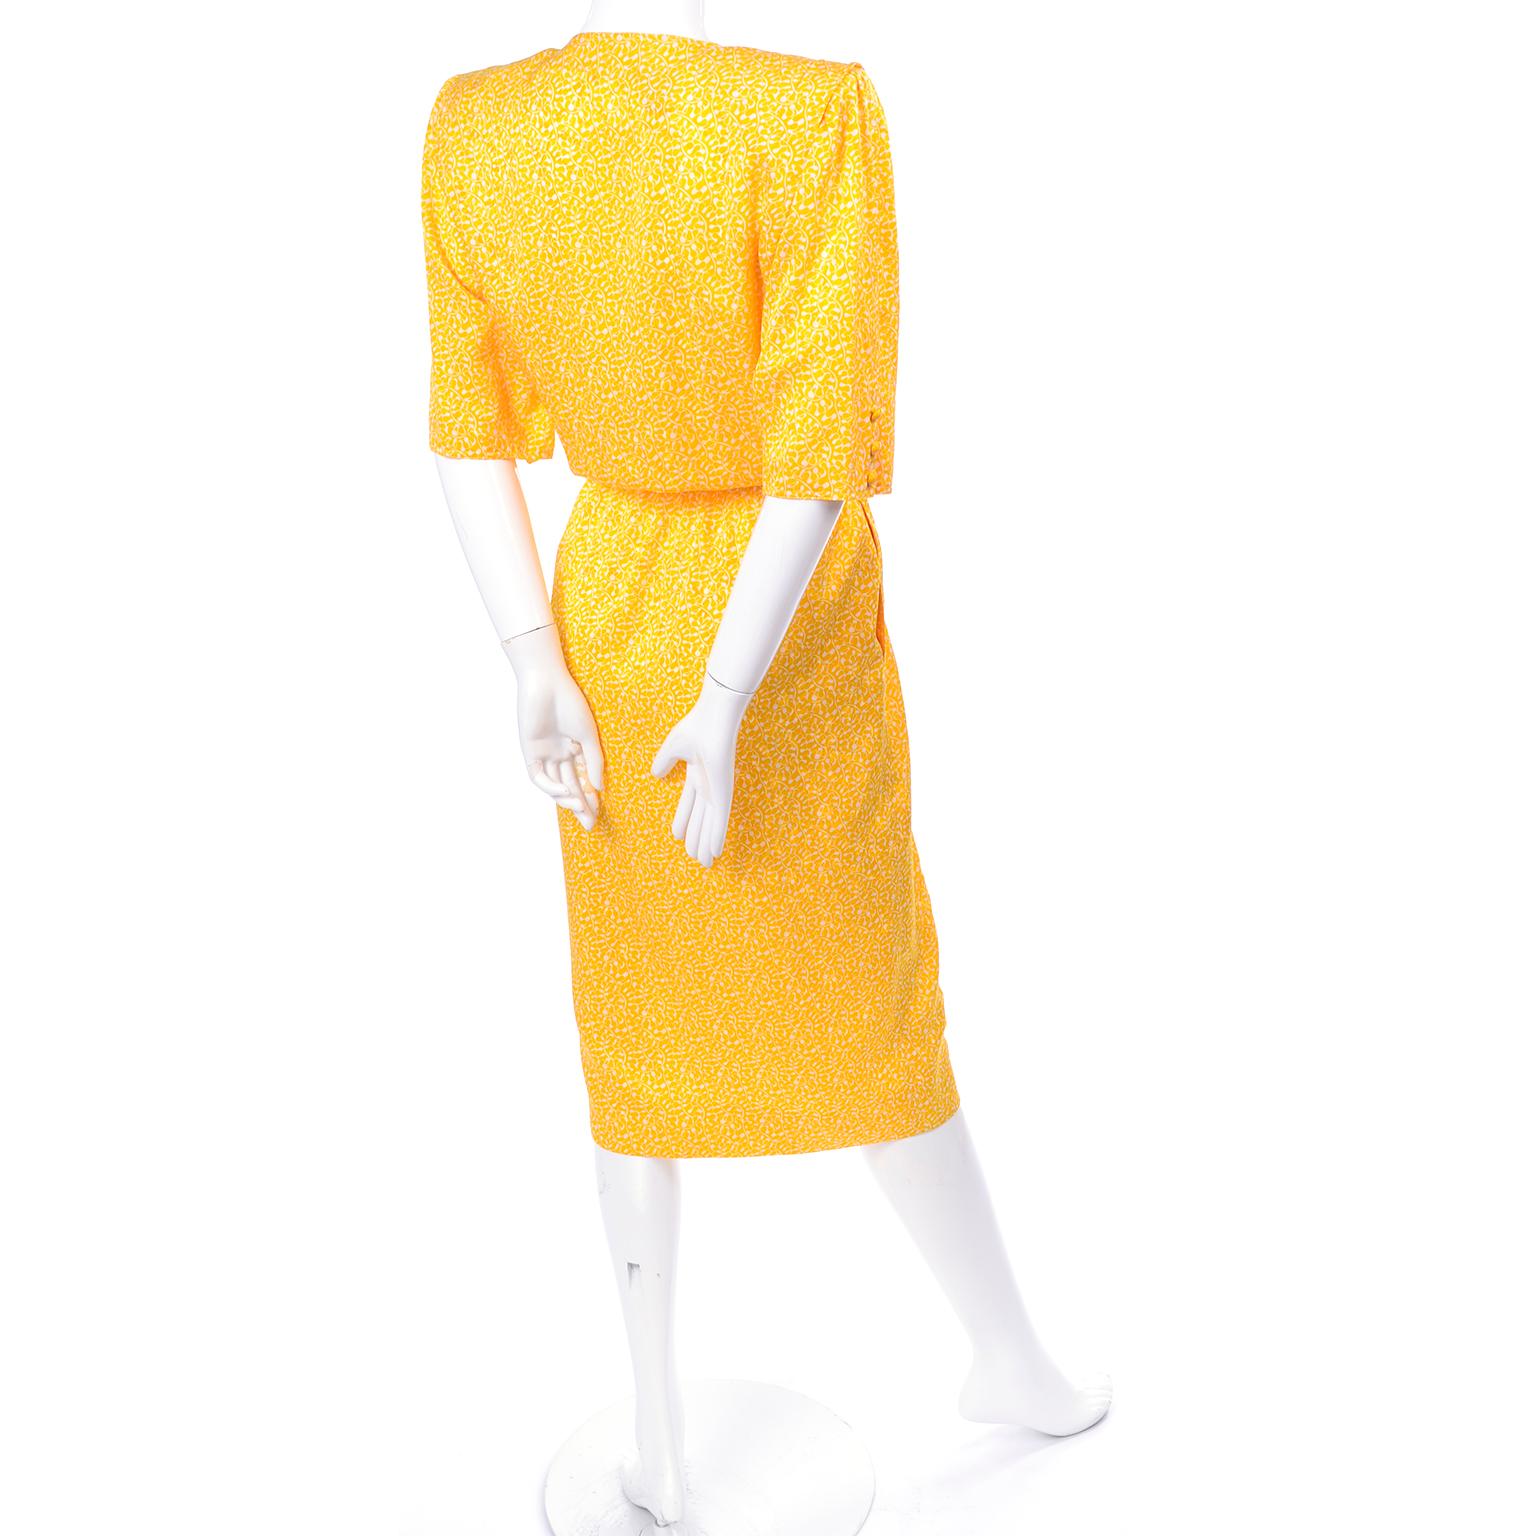 Vintage Ungaro Parallele Rayon Dress in Yellow & White Print For Sale 1